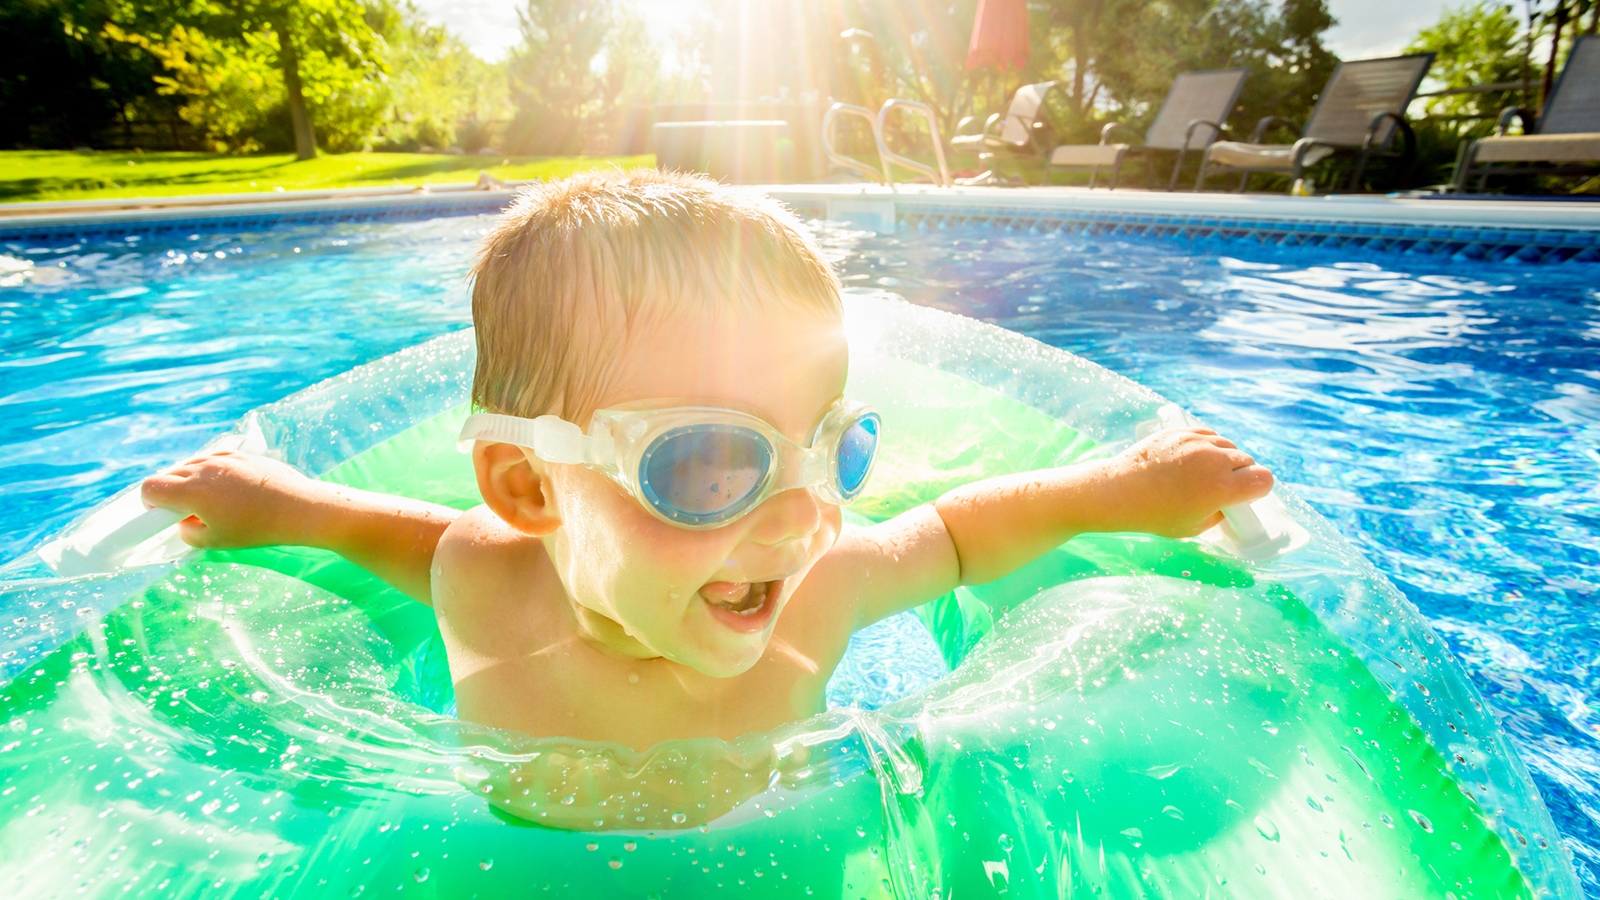 Small child wearing swimming goggles with a round floatie in a residential backyard pool.